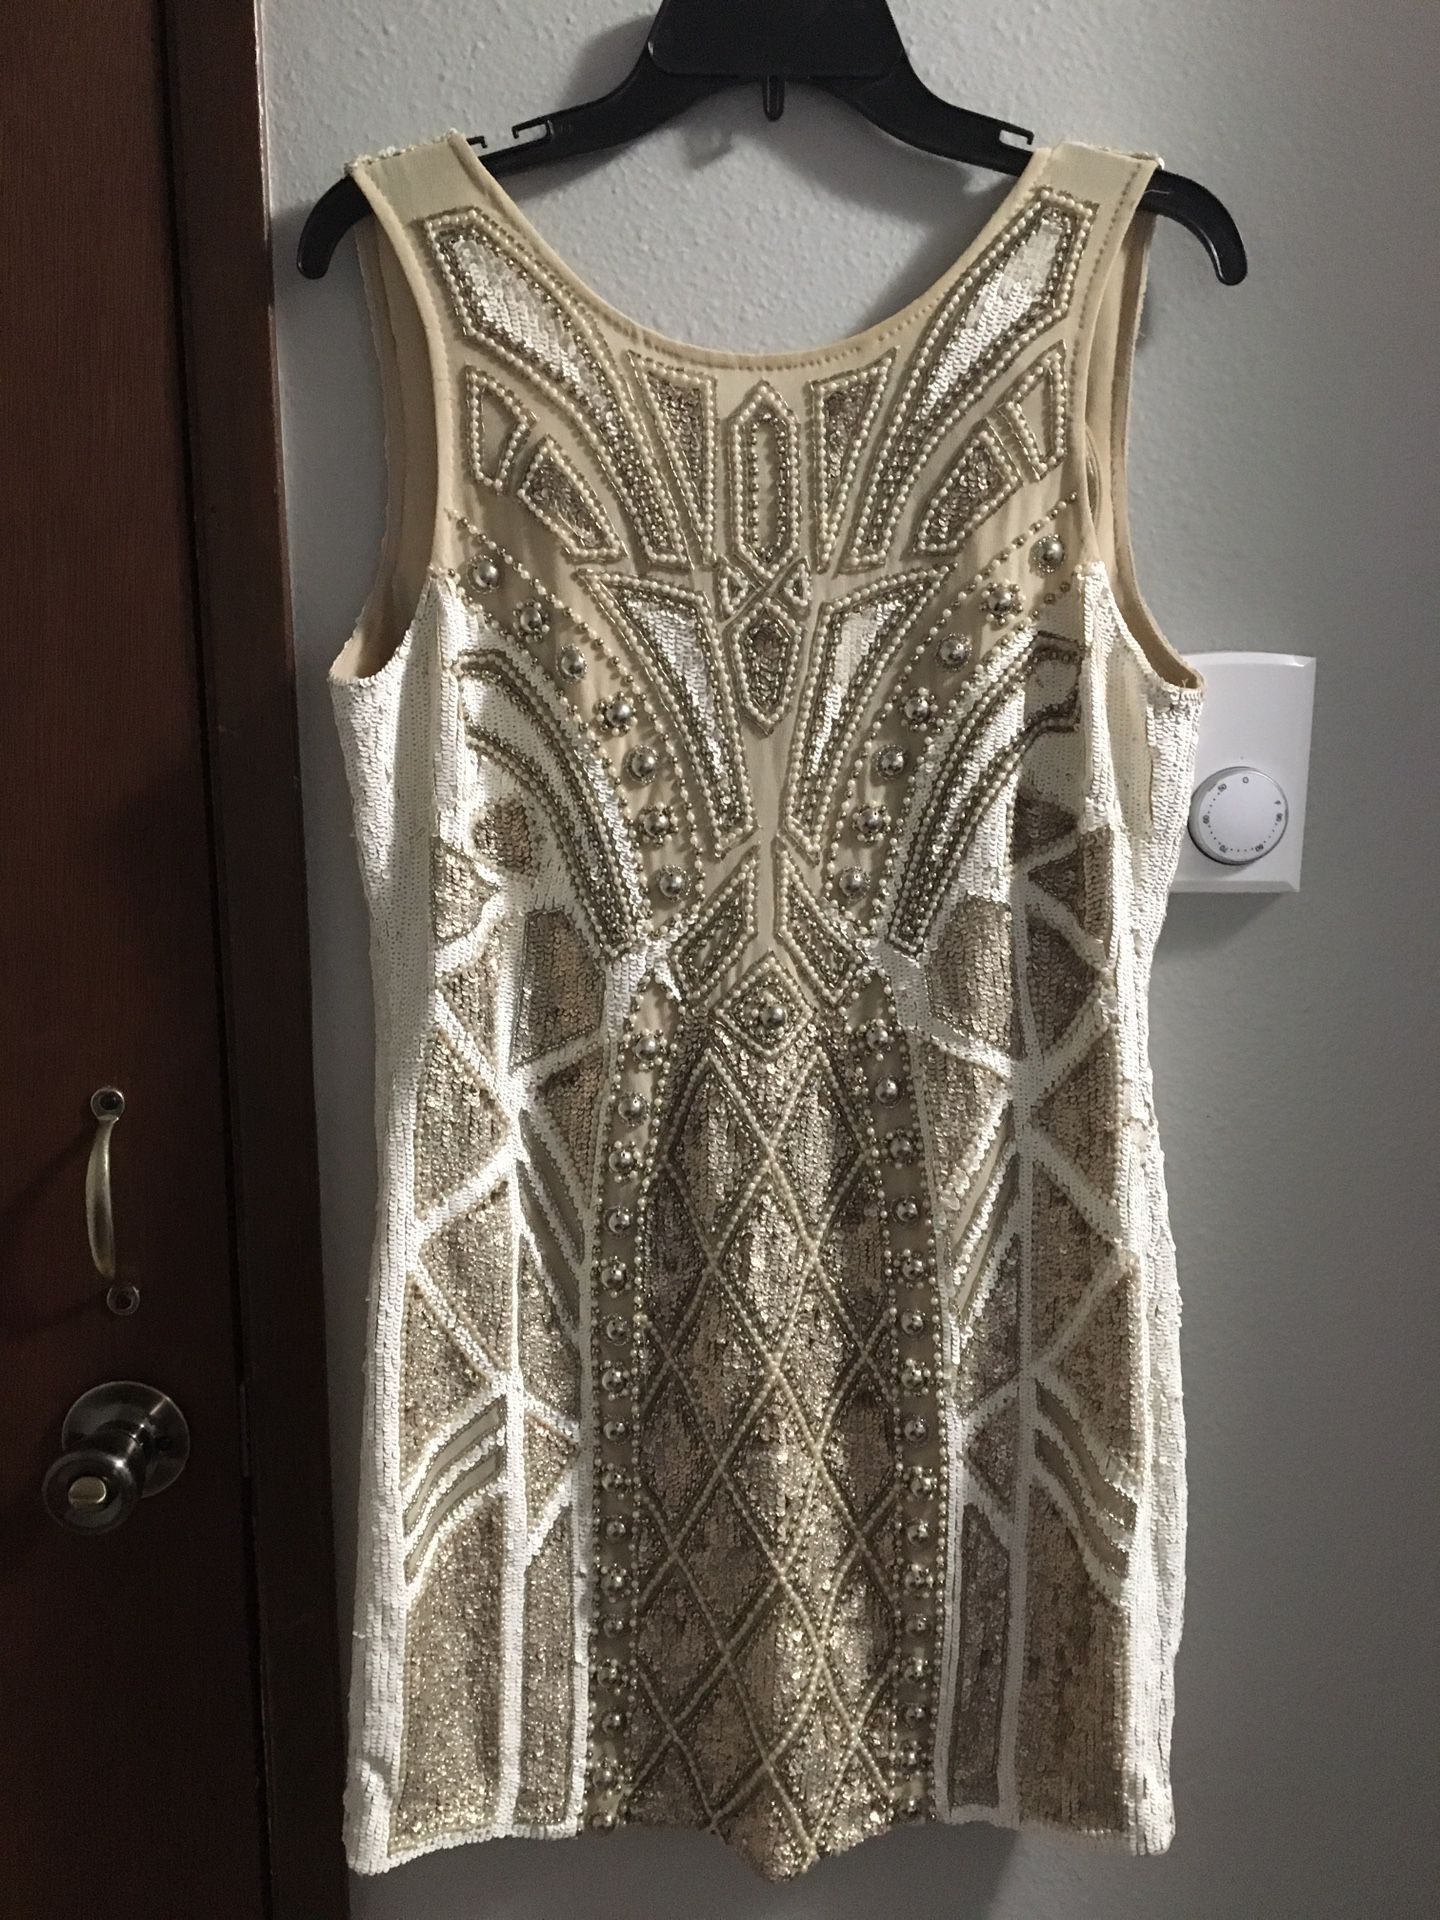 White and gold designer cocktail dress, size 8